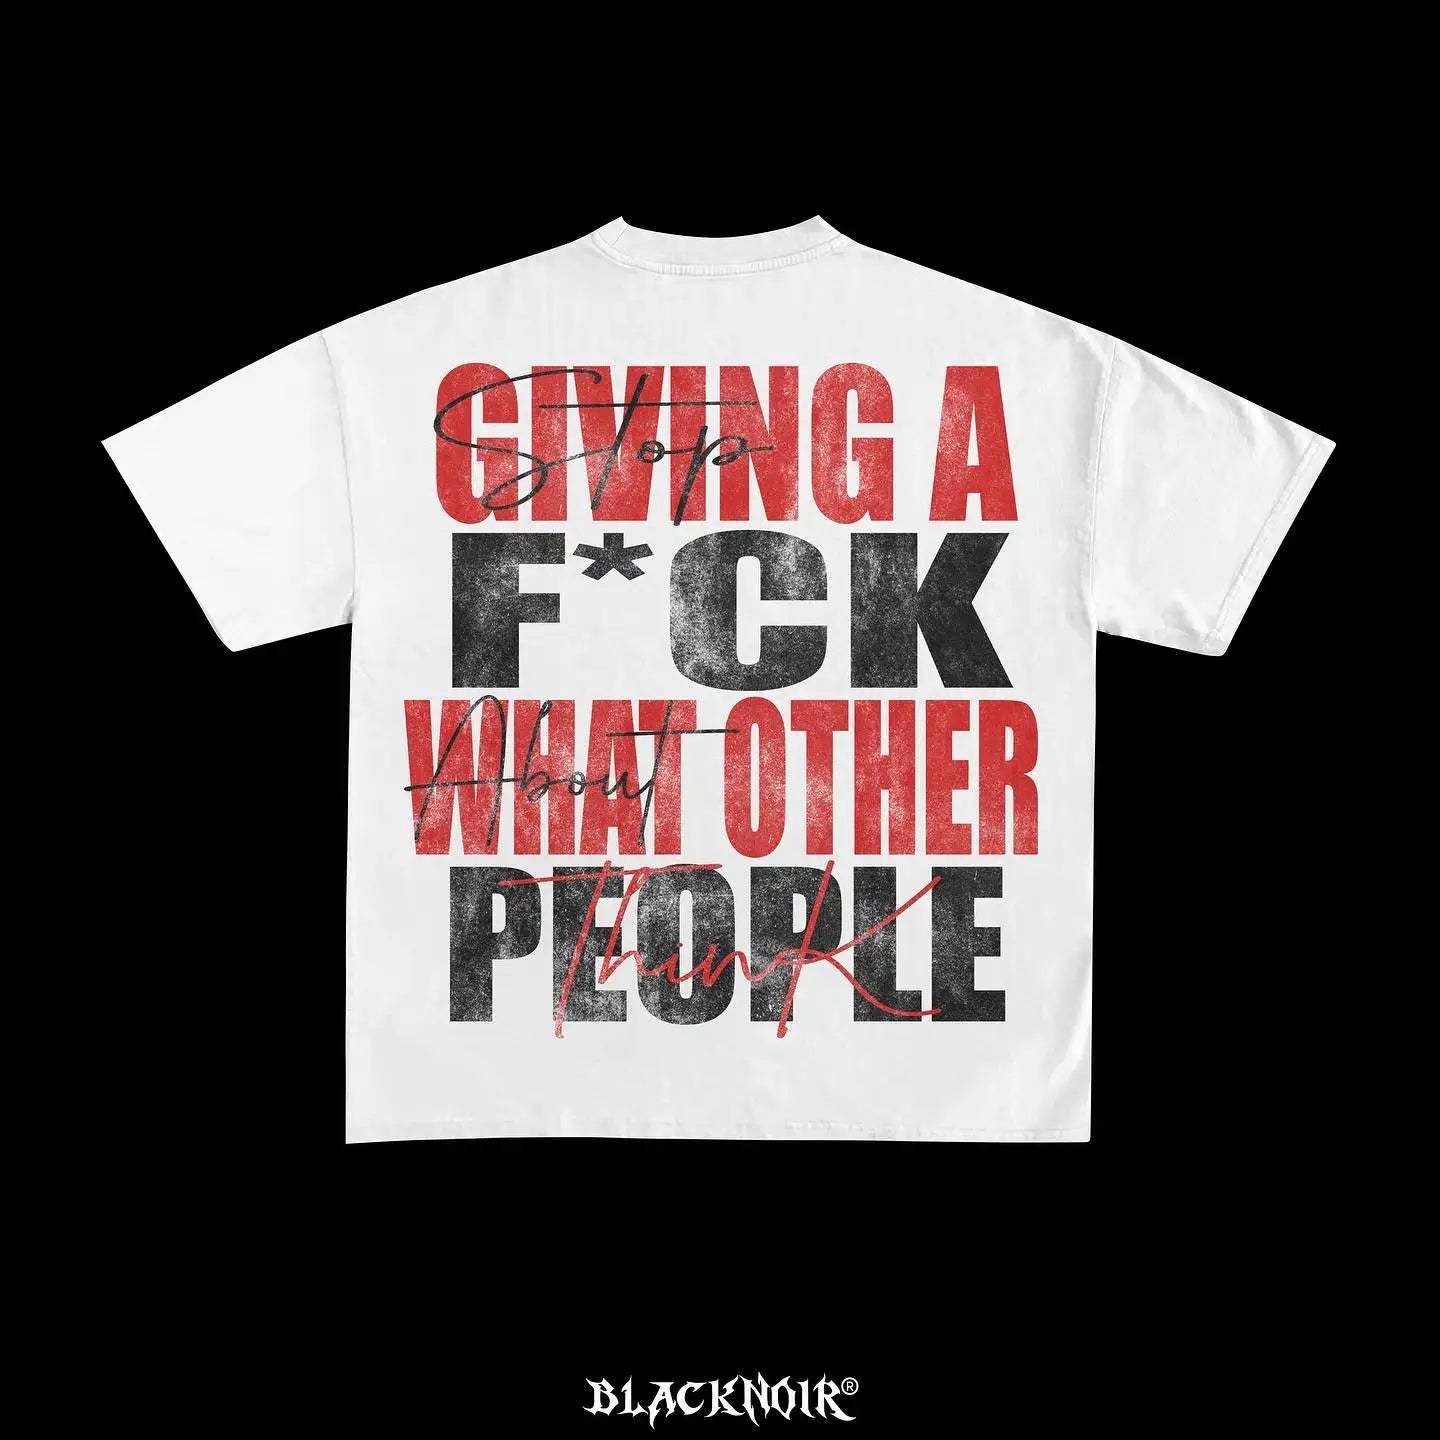 A high-quality, oversized white cotton T-shirt featuring large red and black graphic 2023 text on the back: "Giving a f*ck what other people think." The brand name "Maramalive™" is displayed at the bottom of this bold goth-inspired design.